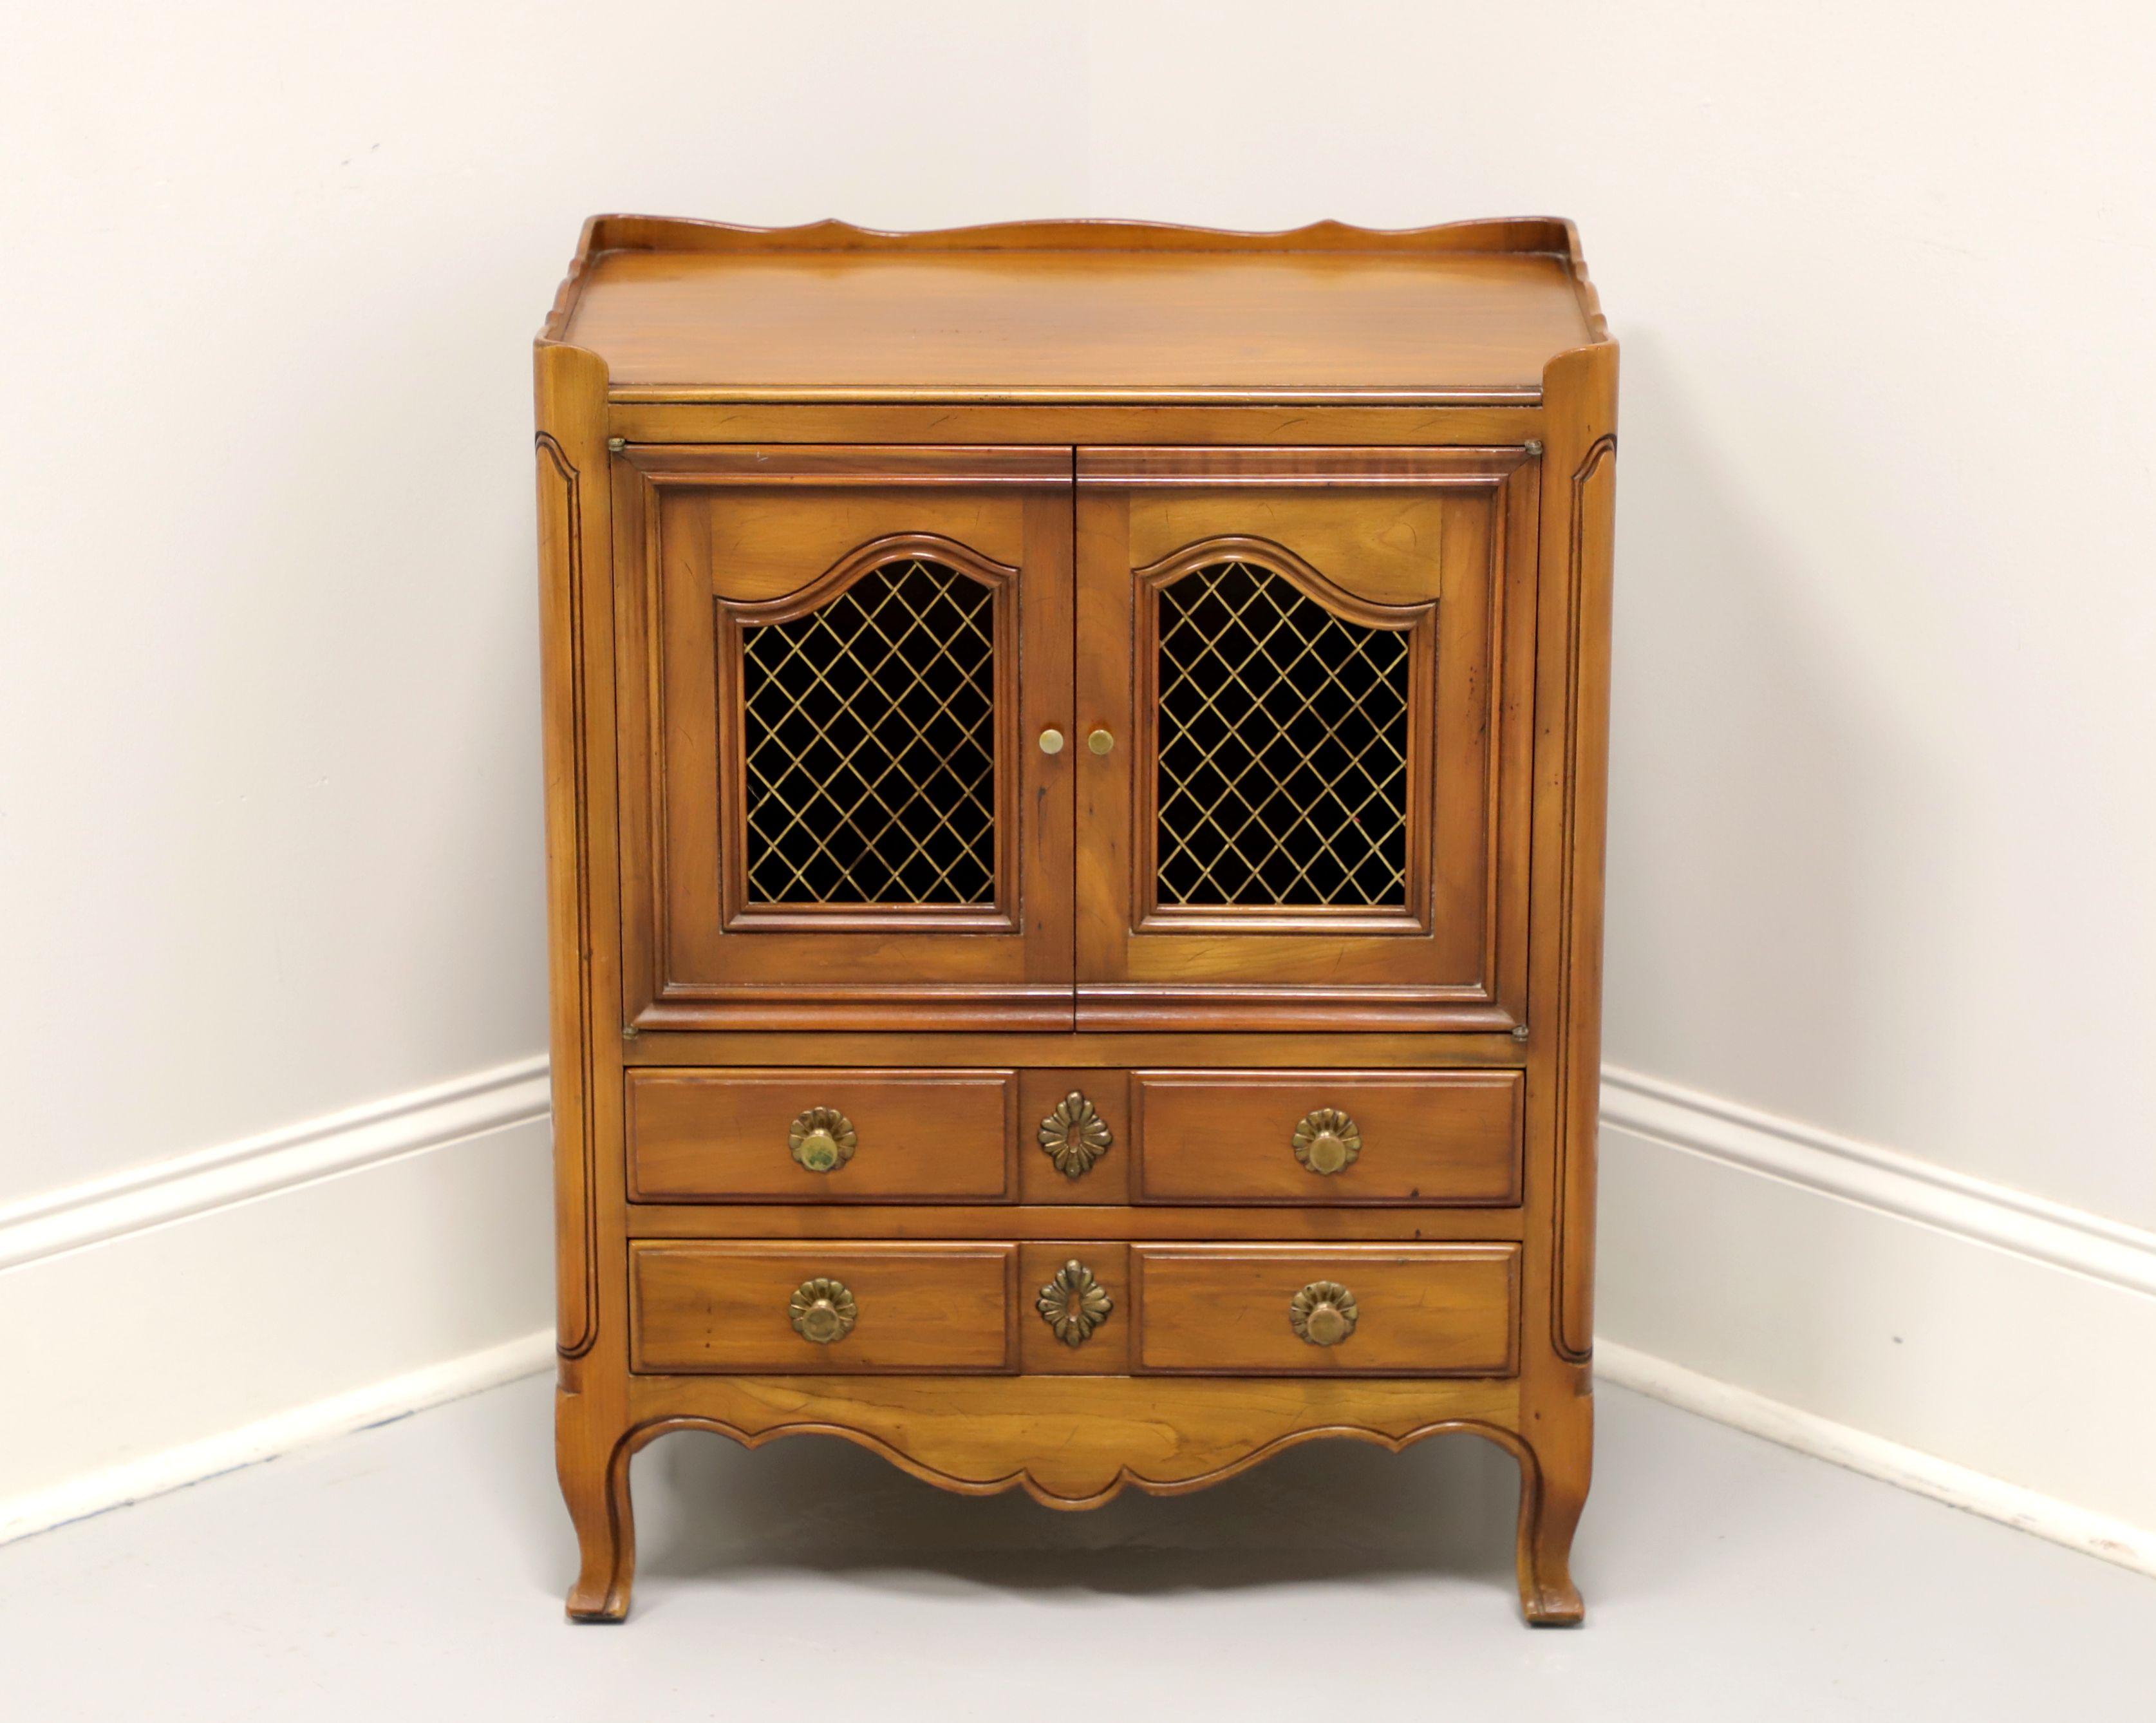 A French Country style nighstand by John Widdicomb, of Grand Rapids, Michigan, USA. Solid cherry with brass hardware, carved gallery to top, brass screens to door fronts, carved panels to front sides, curved legs and scroll feet. Features upper